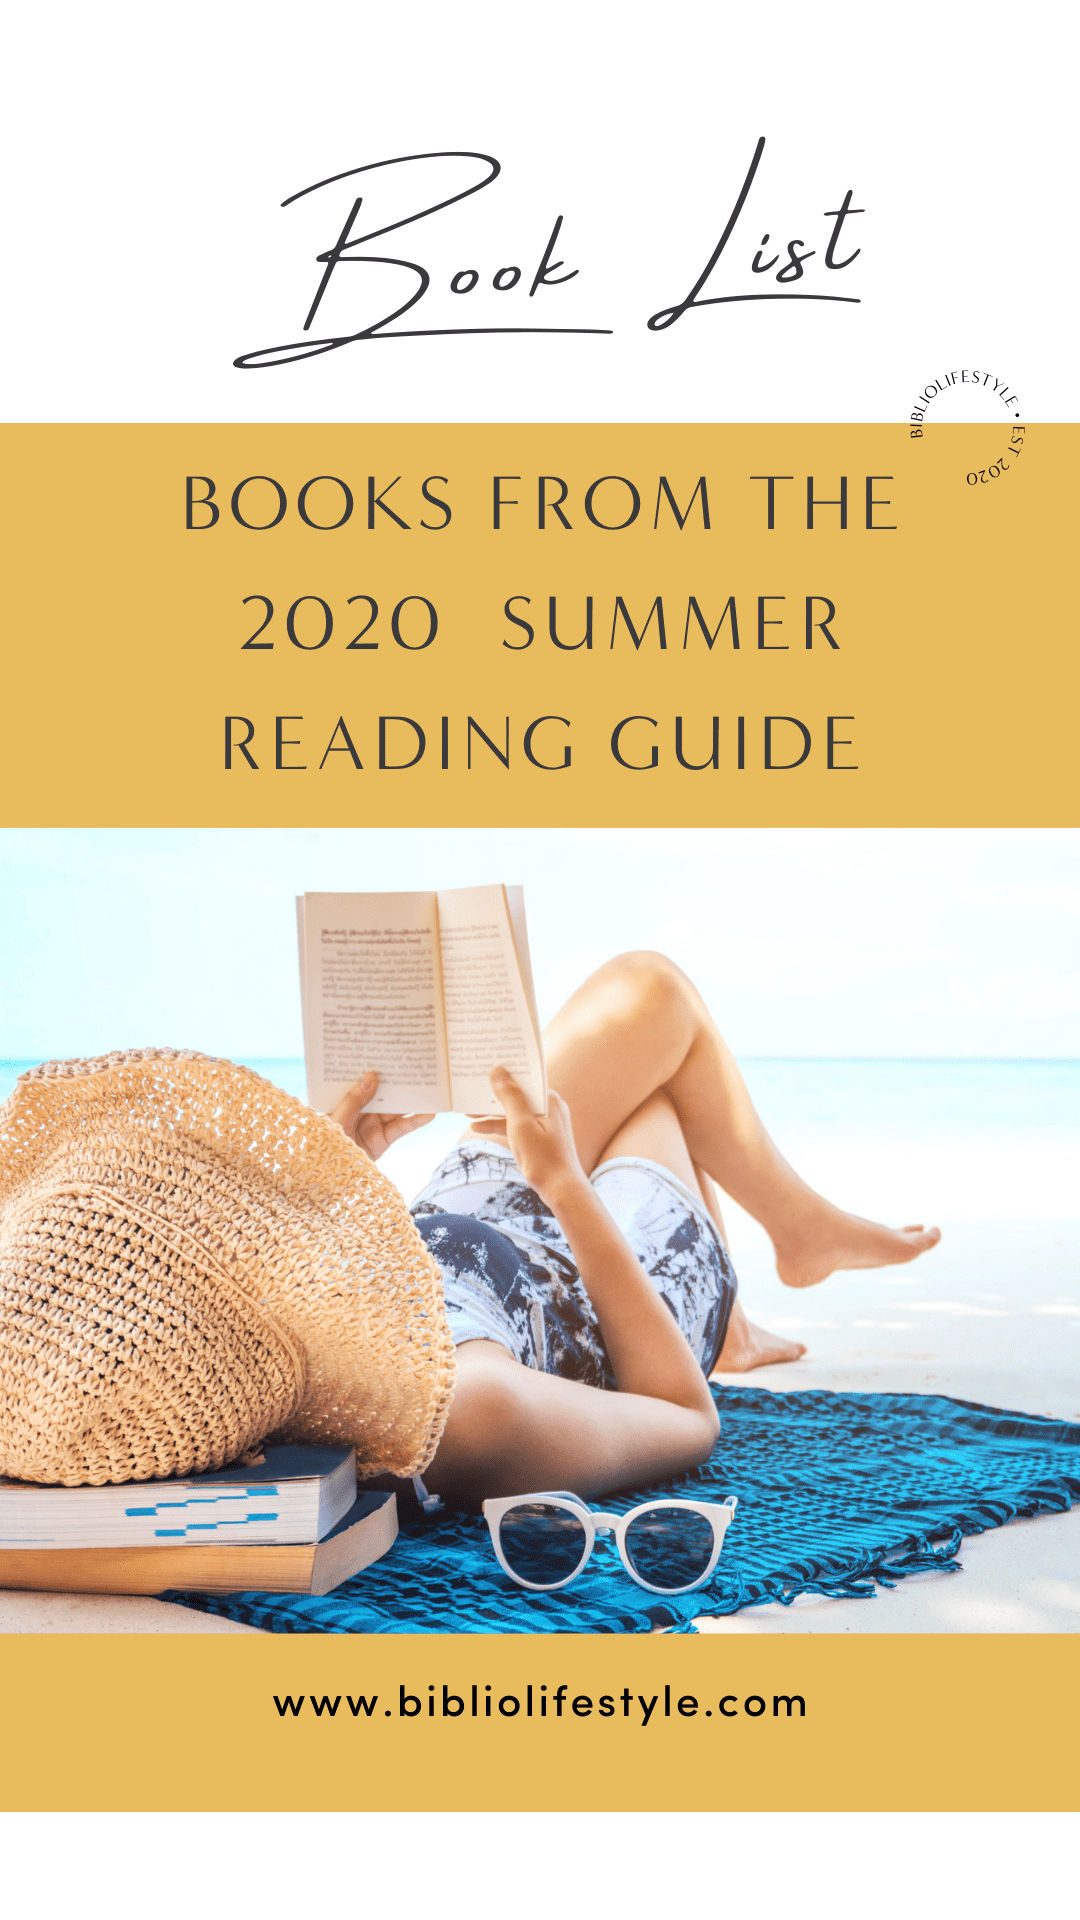 Book List - Books from The 2020 BiblioLifestyle Summer Reading Guide